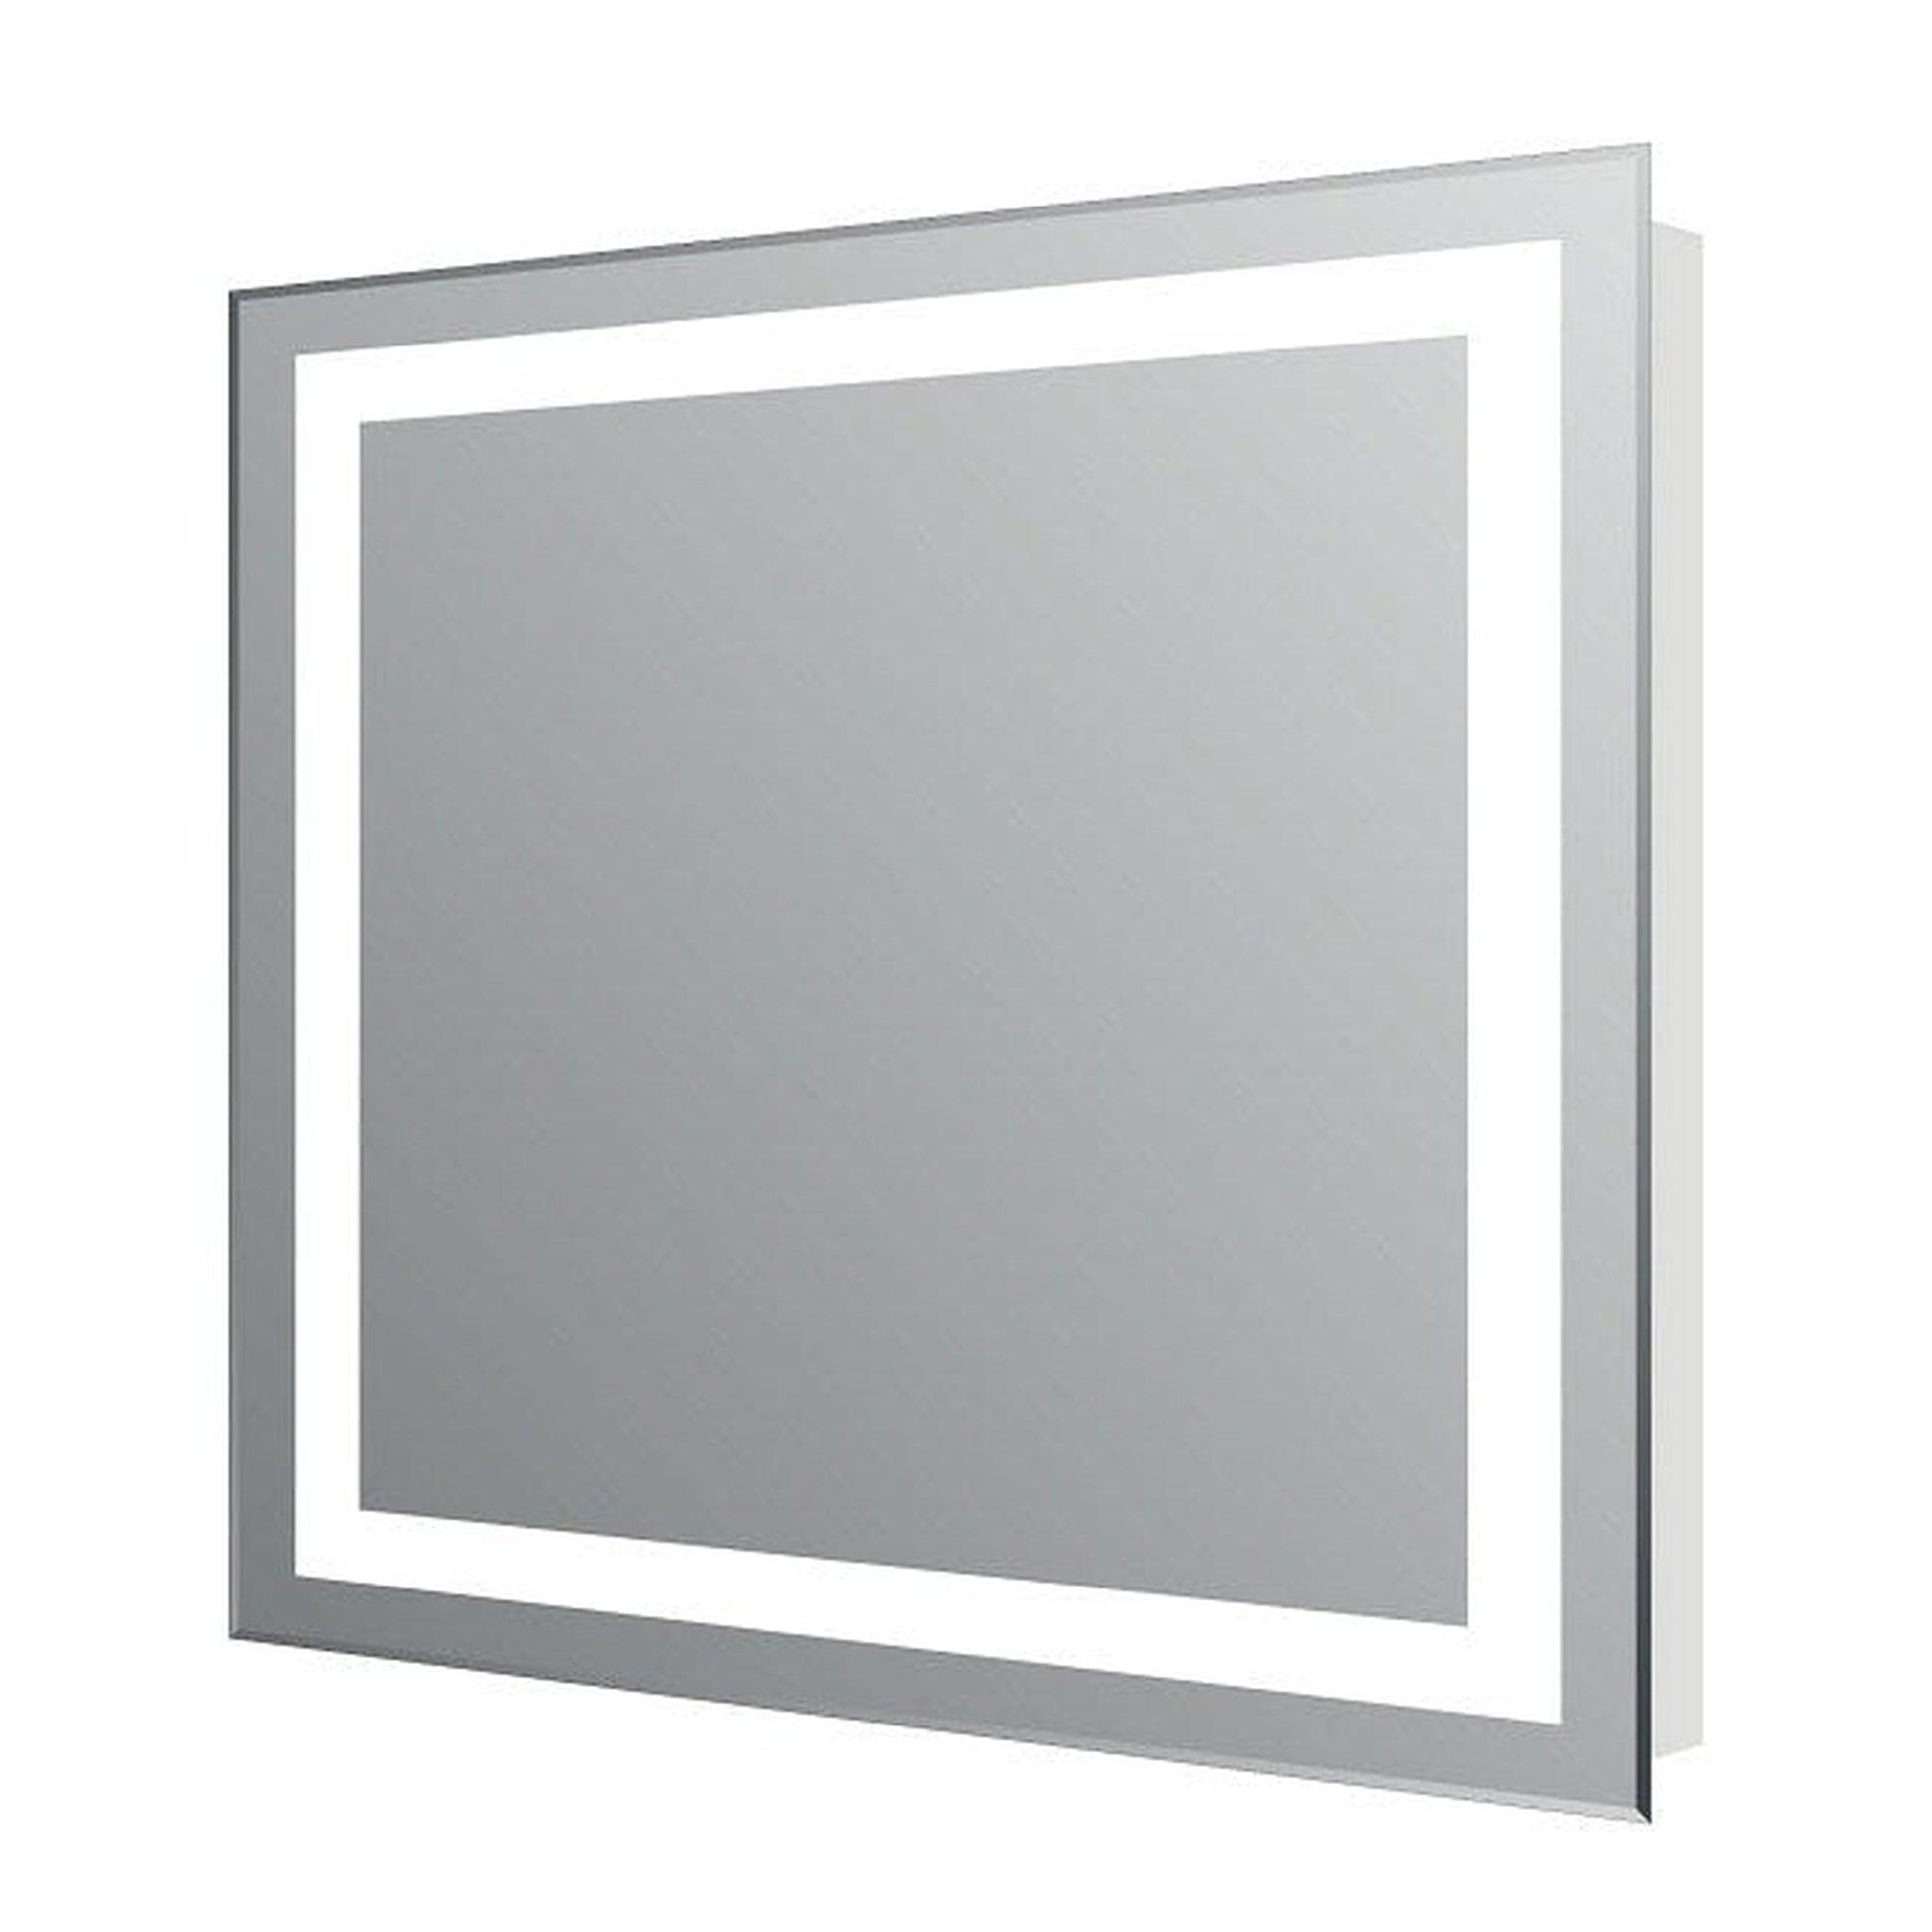 Eviva Lite 24" x 30" Wall-Mounted Bathroom Mirror With Backlit Lighted Led